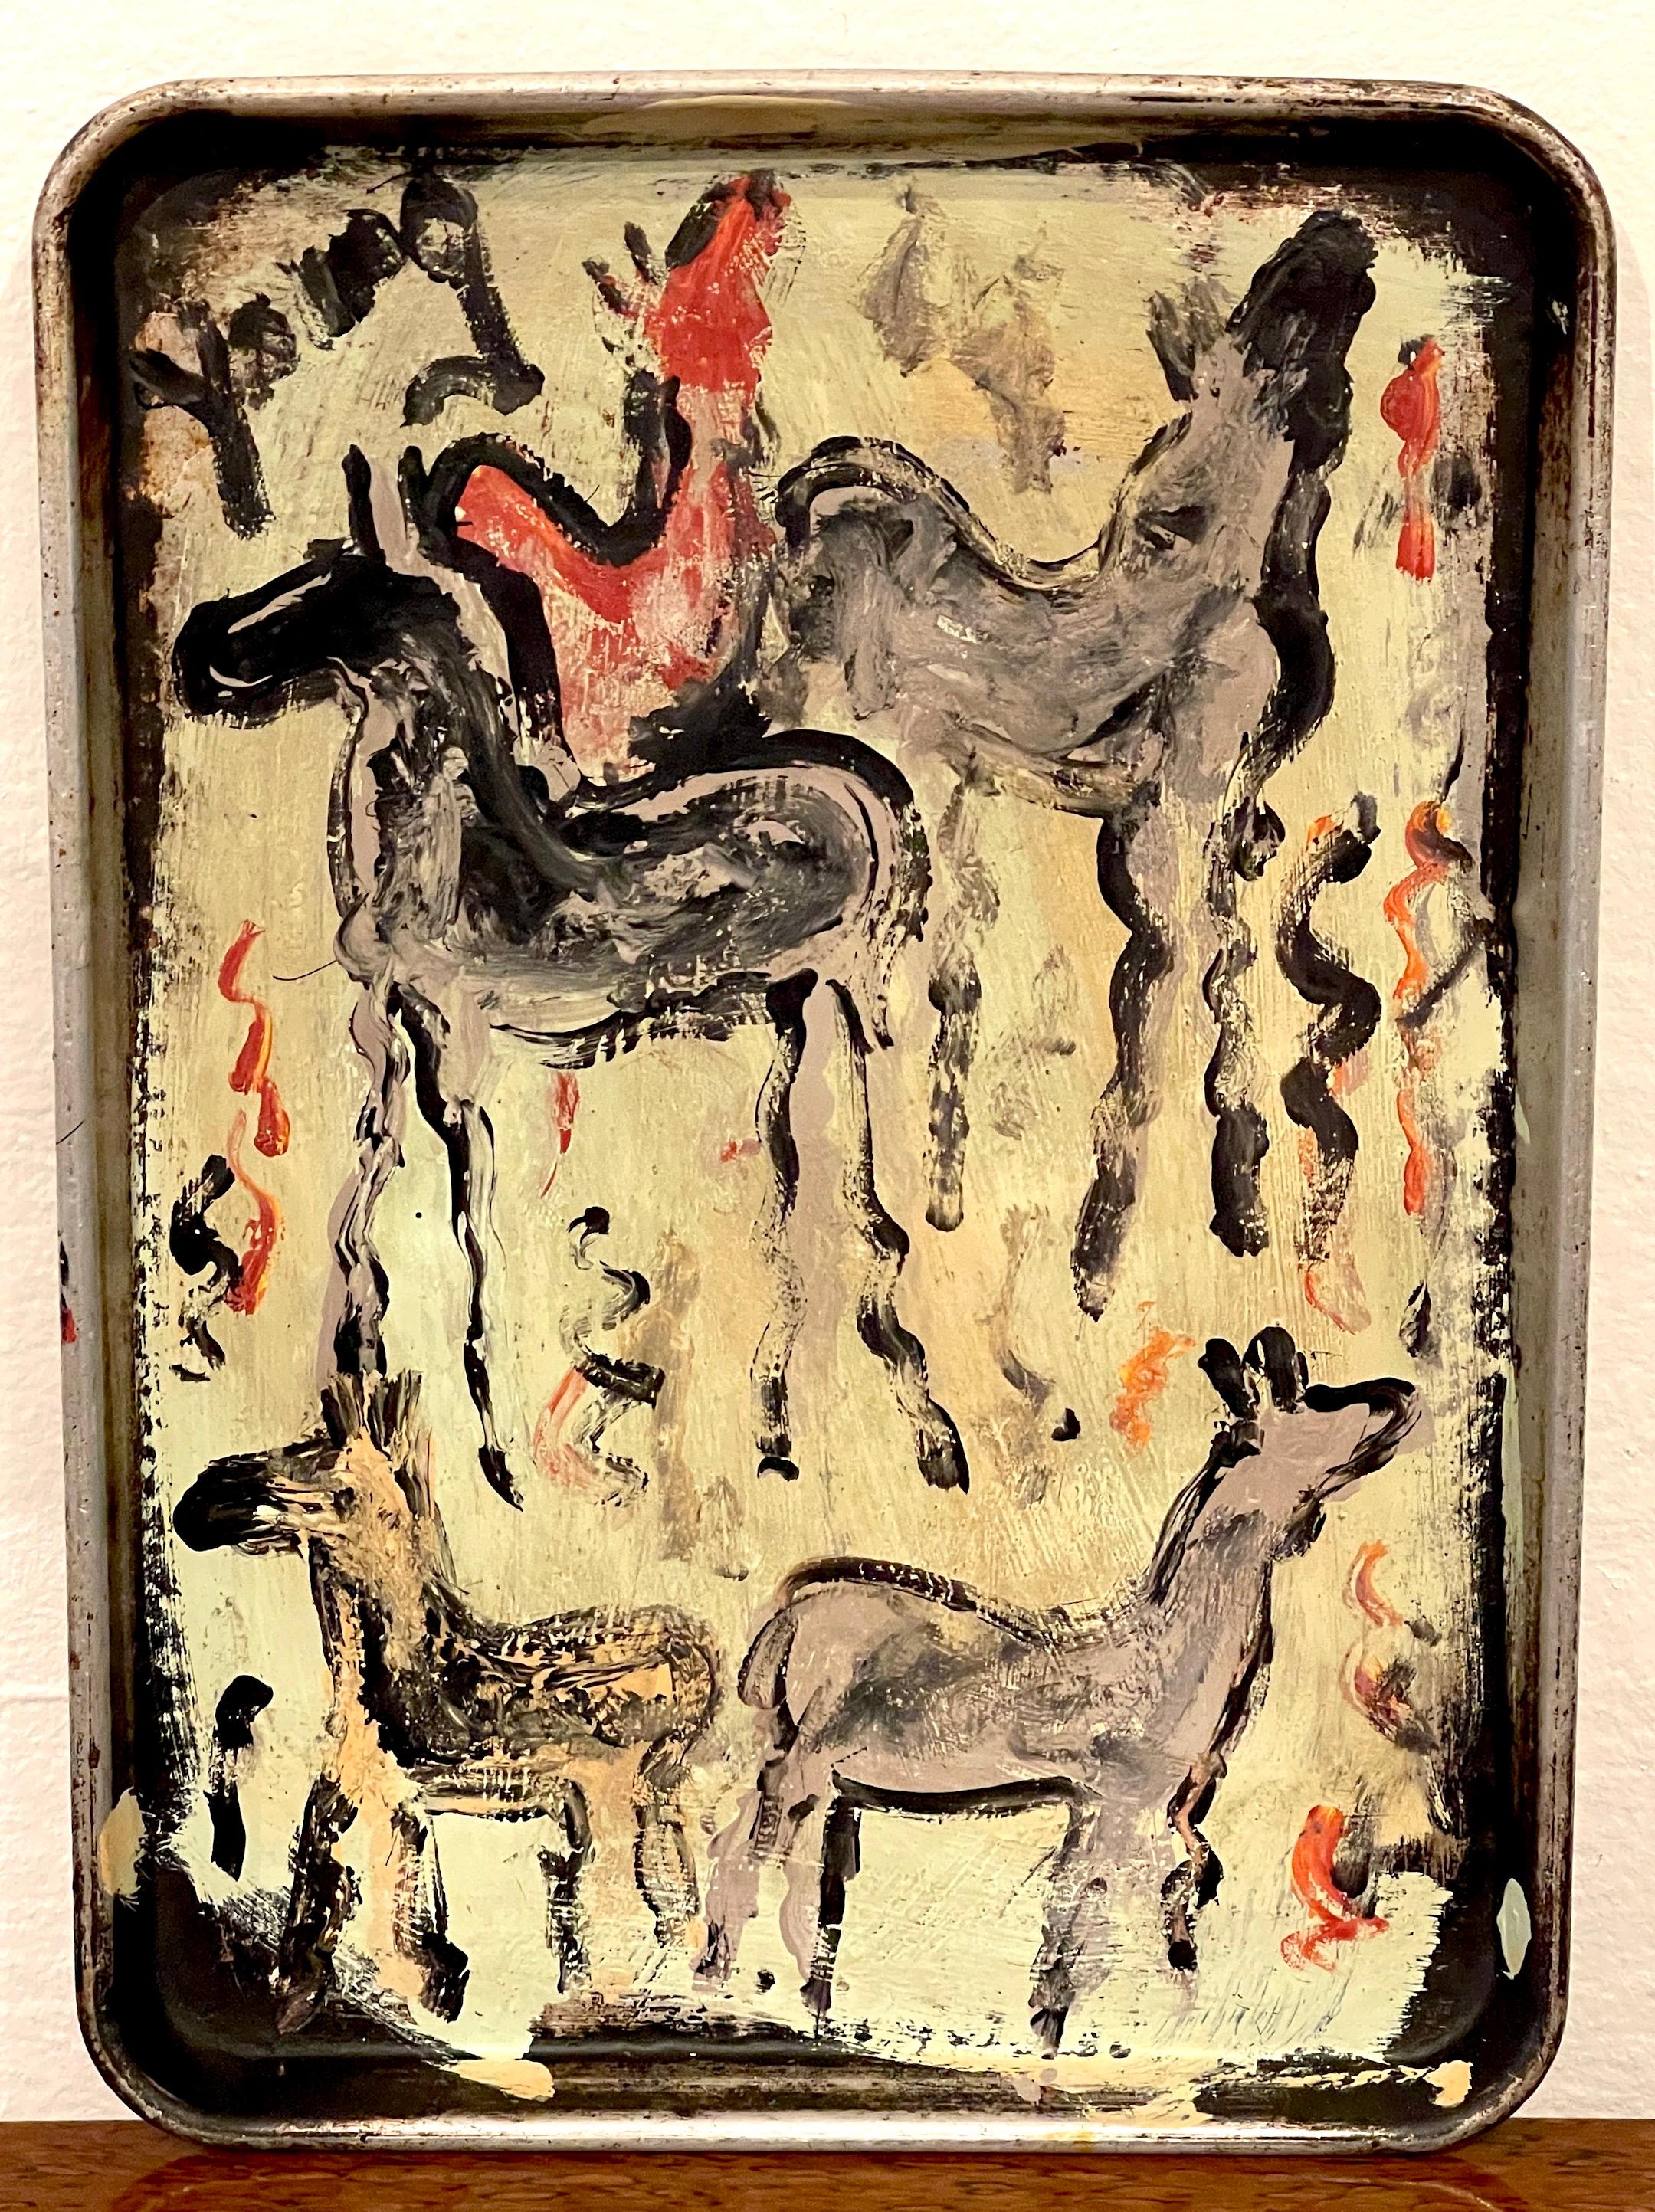 'Herd of Freedom Horses' Purvis Young (1989-1999)
USA, circa 1980s

A progressive work, painted on found metal tray, of five horses in landscape. signed 'Young' upper right corner. In untouched well cared vintage condtion, ready to place. 

The